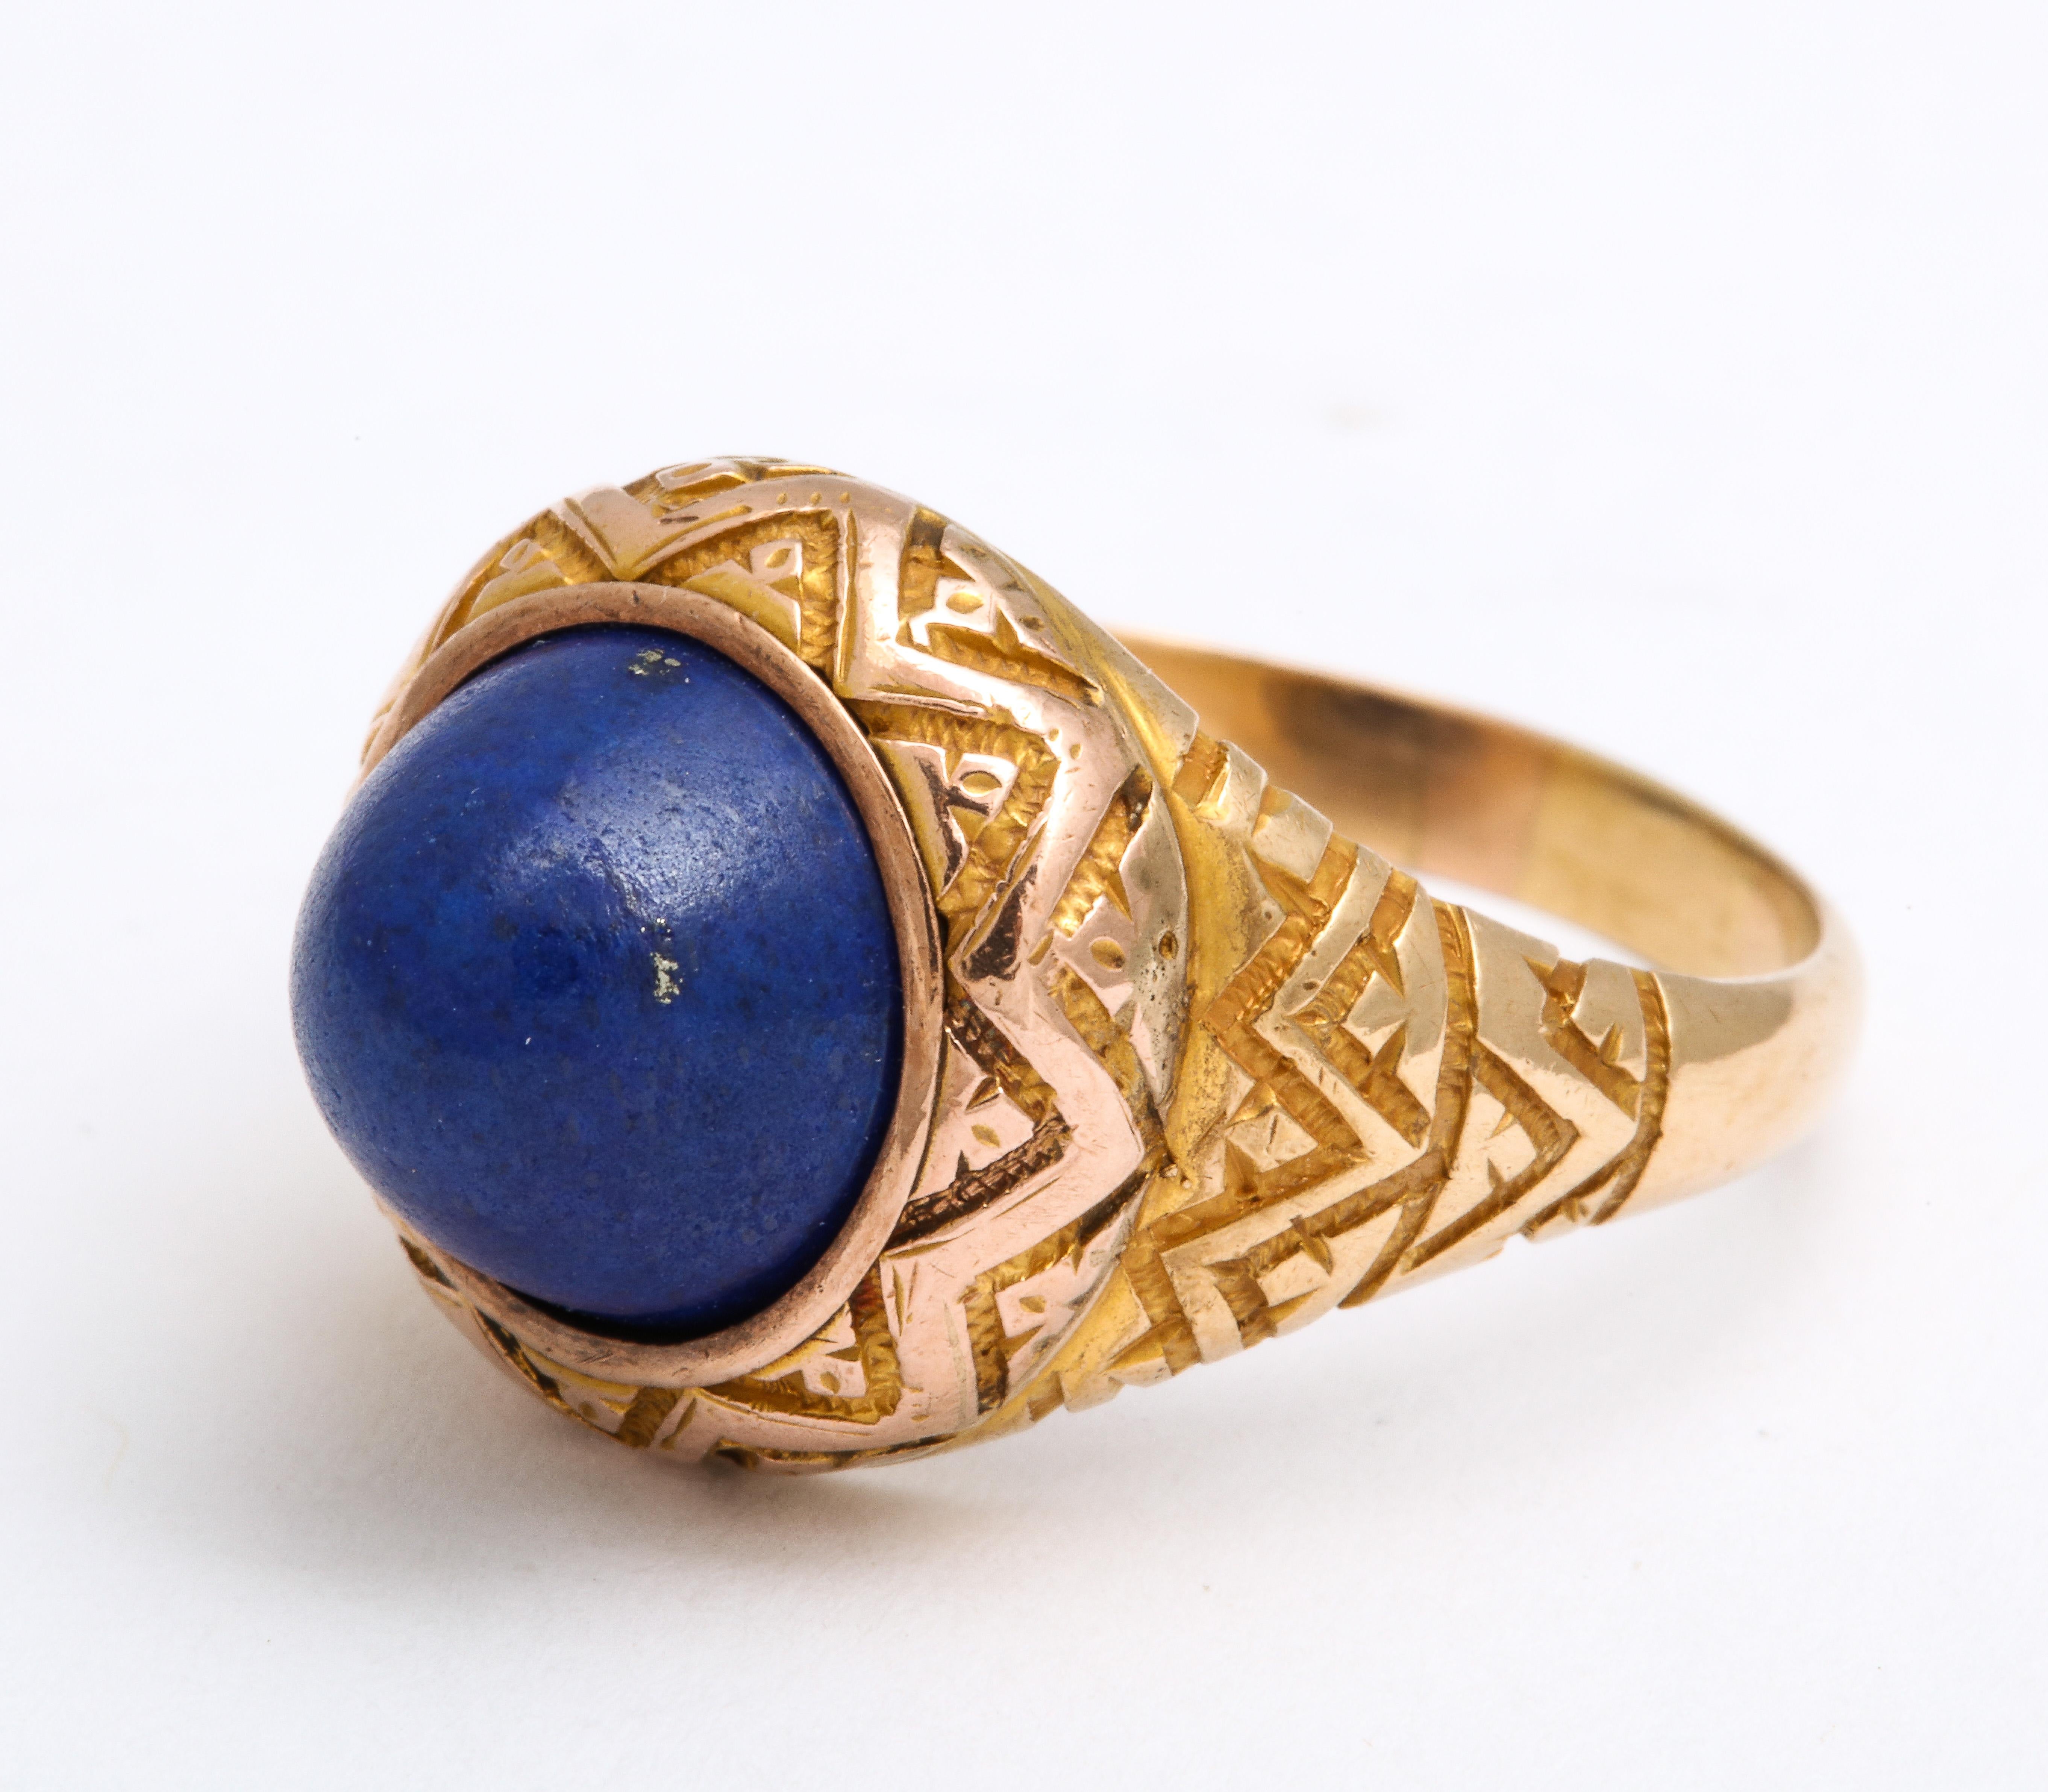 A two carat plus dome of Lapis Lazuli has characteristic flecks in the stone and looks like the clear blue of the night sky. The ring cut is know as a sugarloaf as it rises upward from the shank. A stunning geometric shank in 14 Kt.emphasizes the